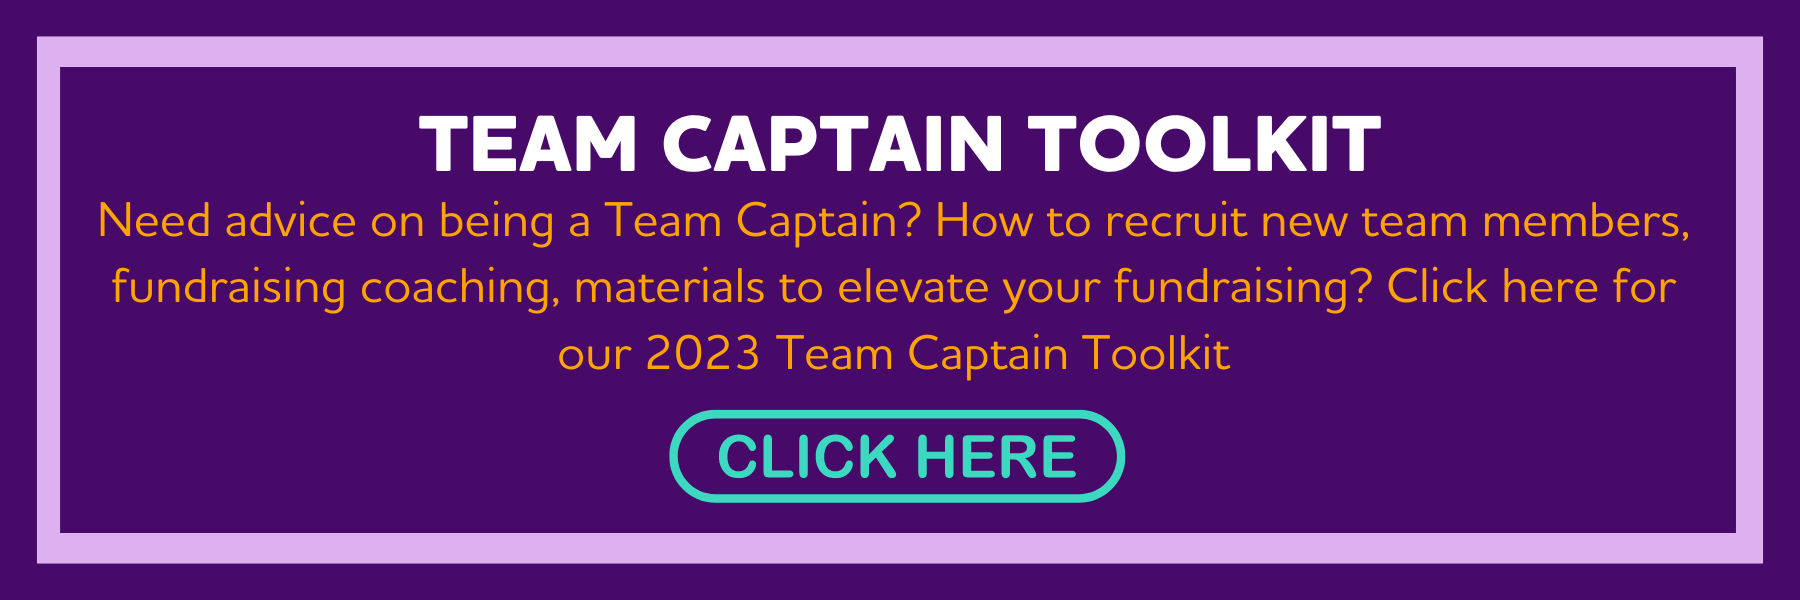 tc_toolkit_button231484.png